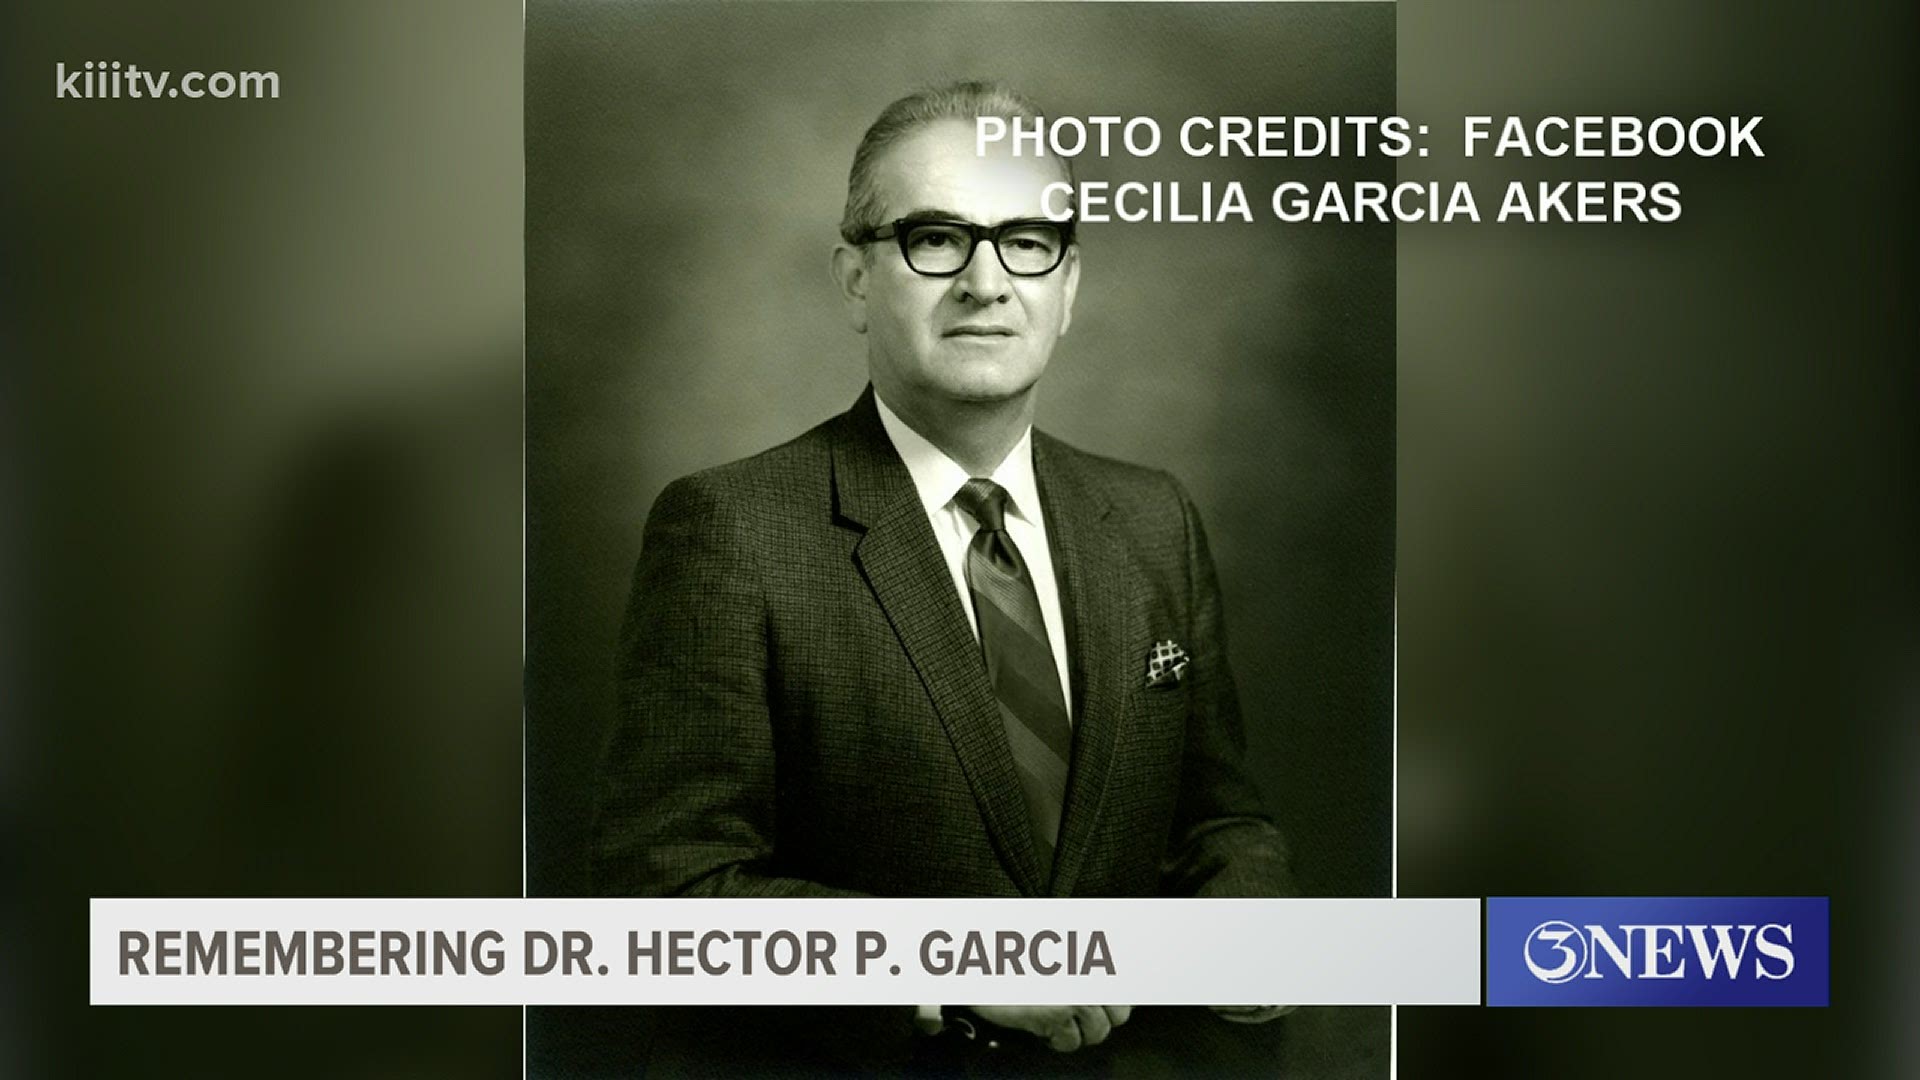 Dr. Hector P. Garcia was a local physician, World War II veteran and civil rights pioneer.